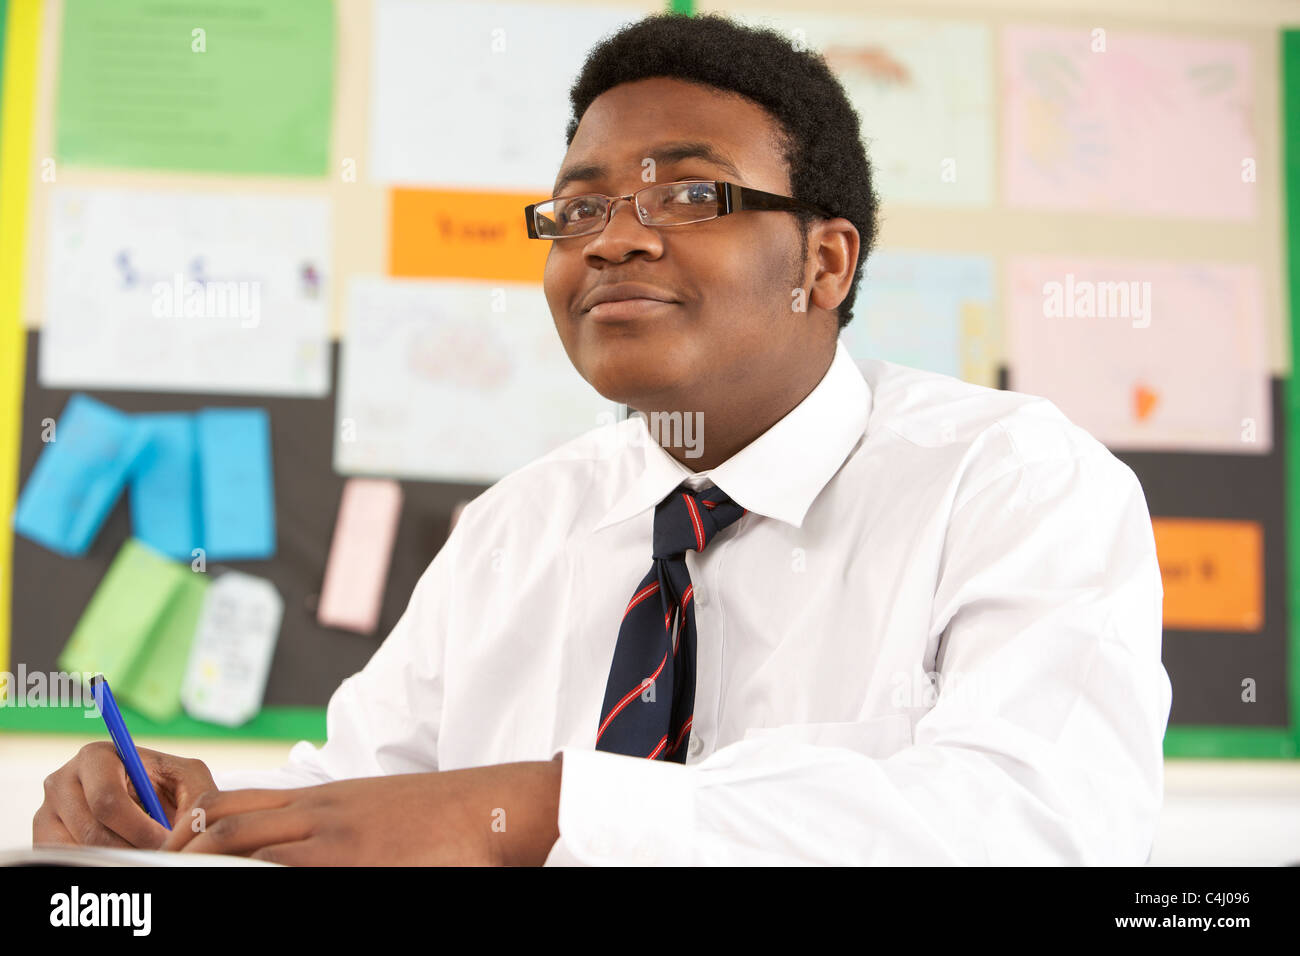 Male Teenage Student Studying In Classroom Stock Photo